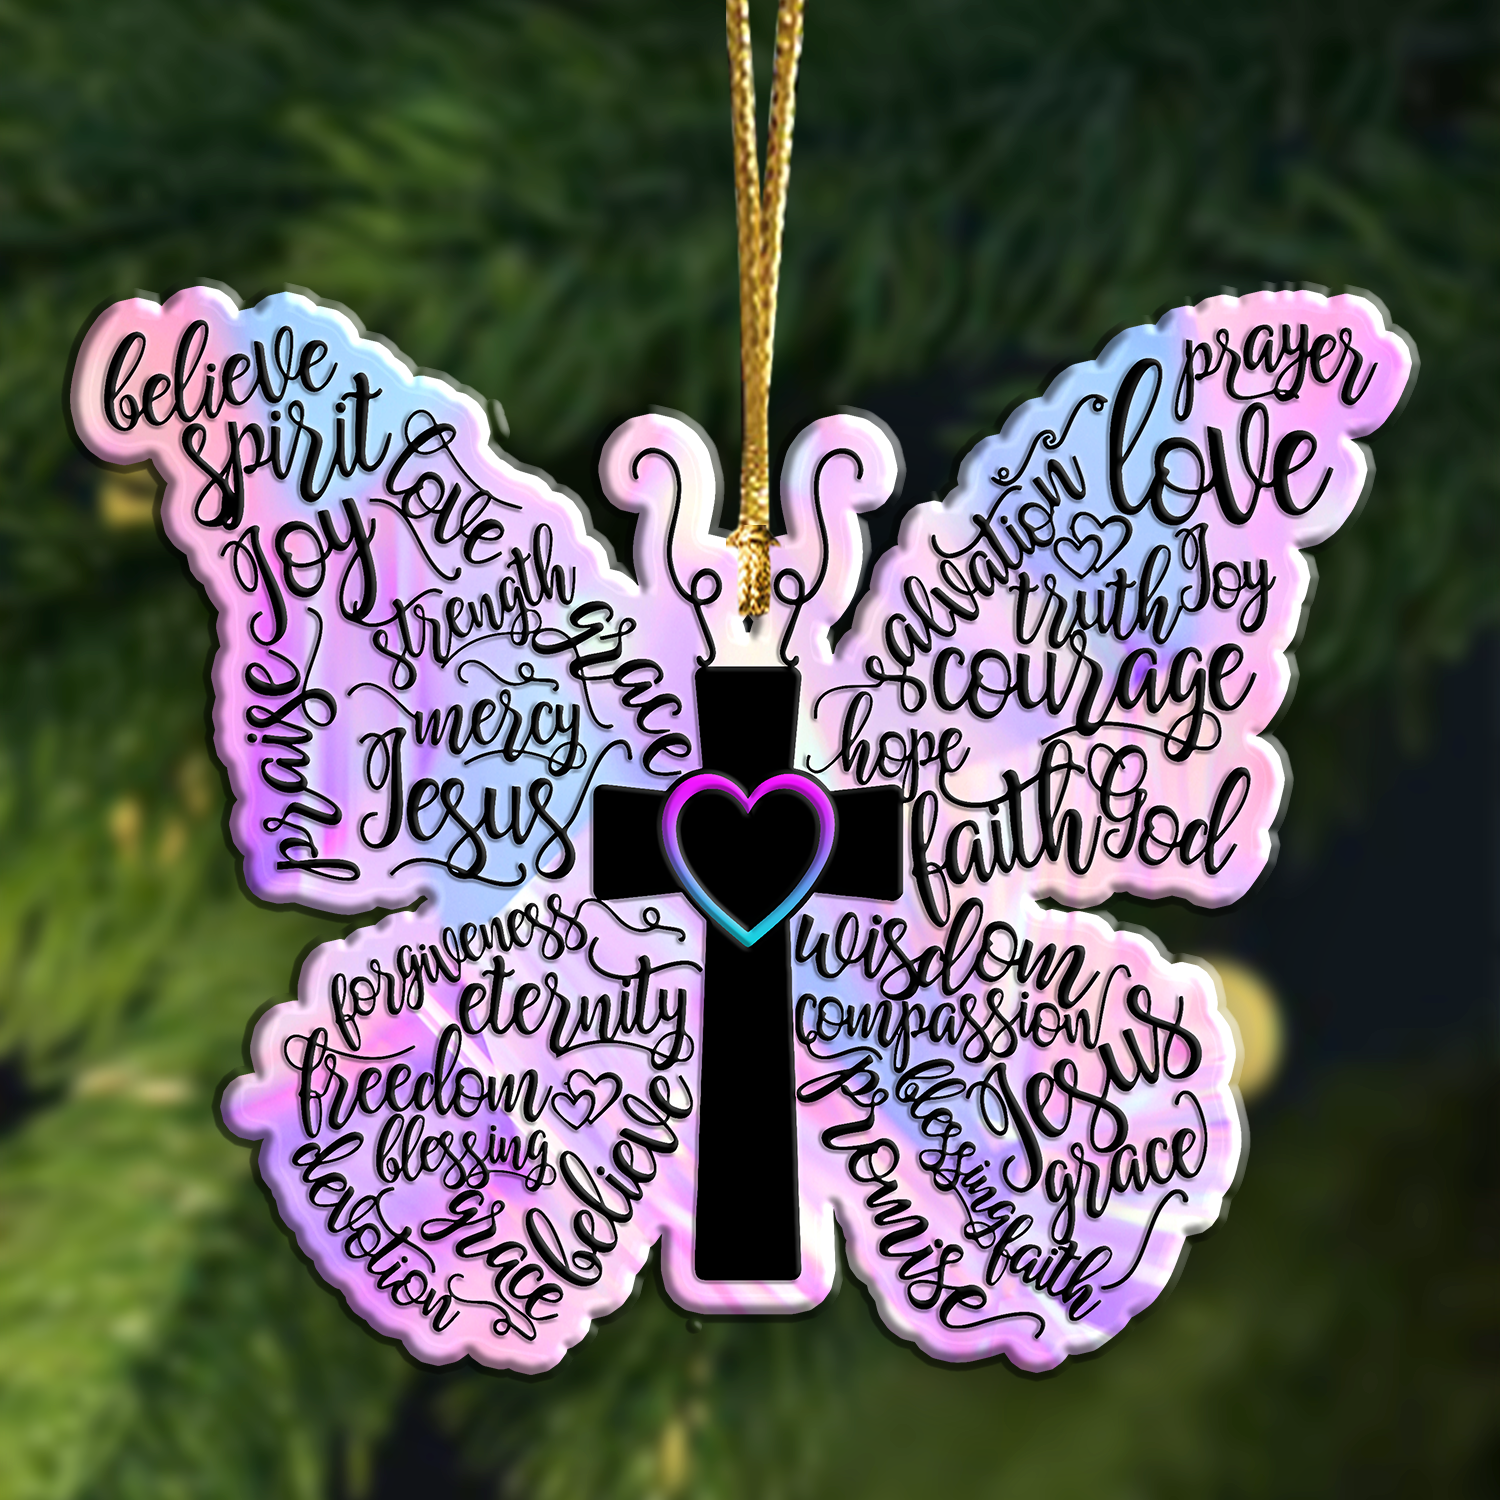 Hologram Butterfly Christian Cross Ornament Gift Bible Verse Christmas Ornament Car Hanging